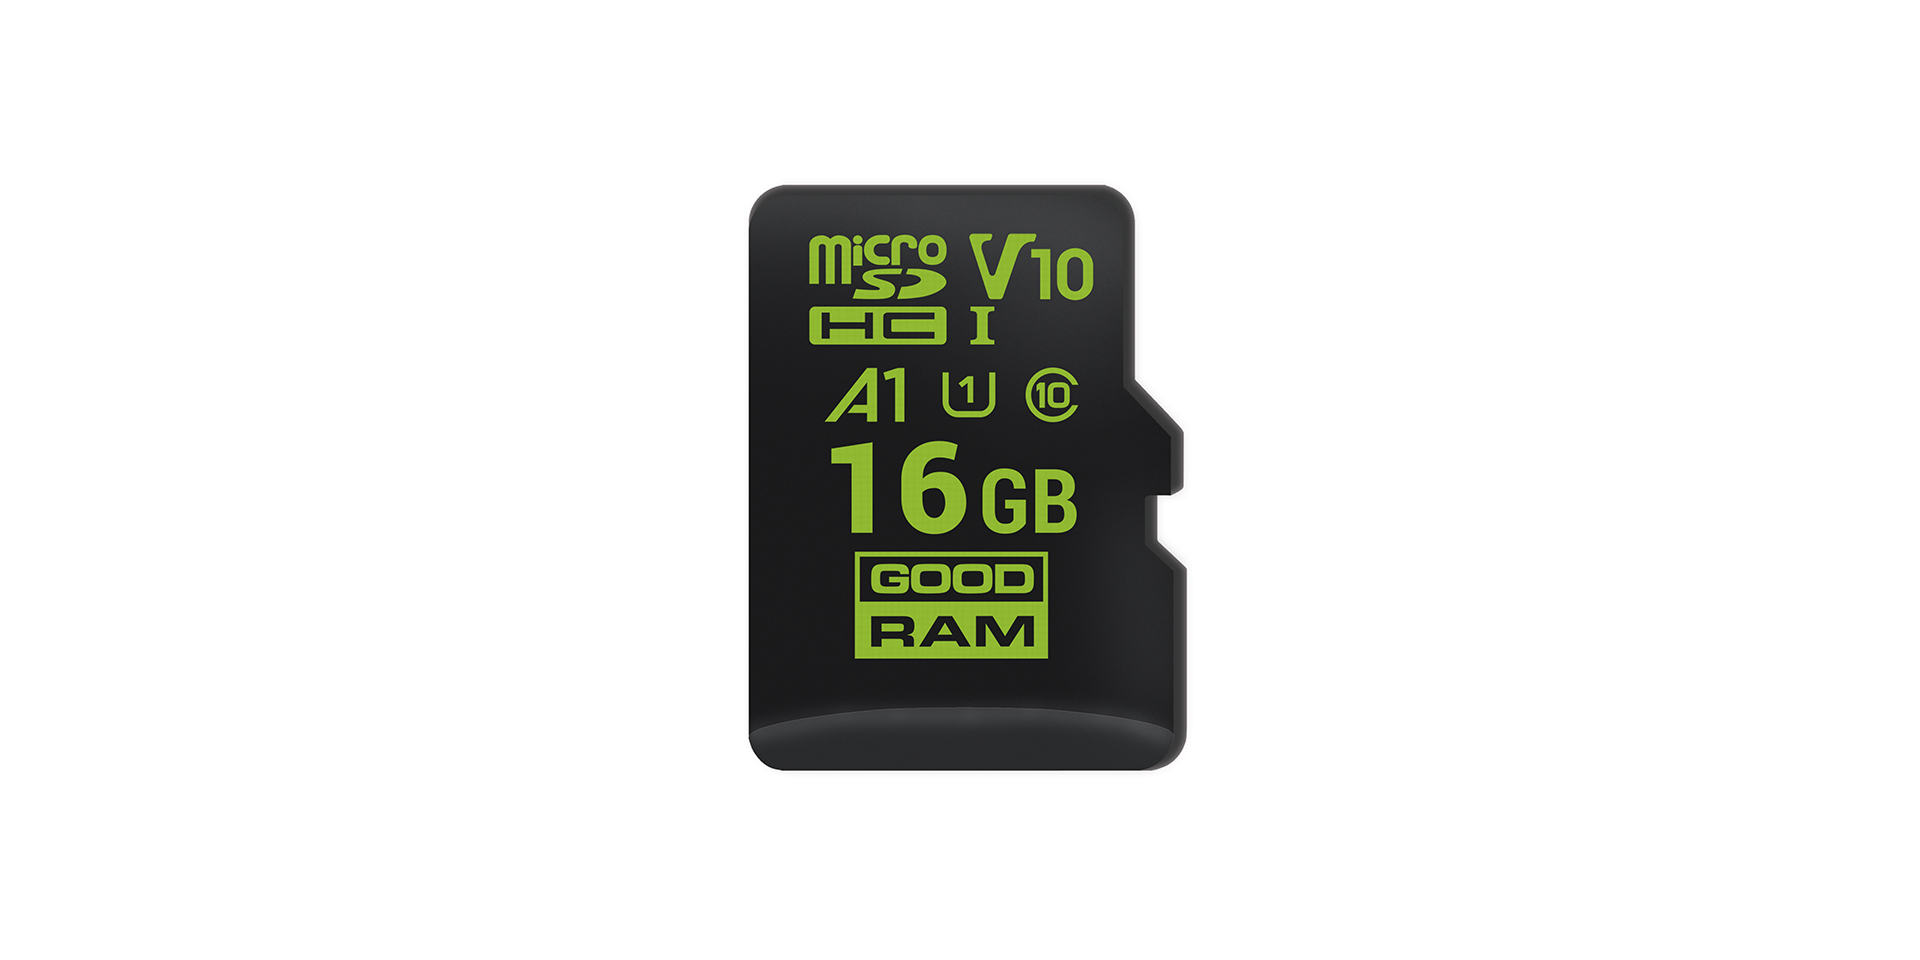 Microcard for Android smartphones